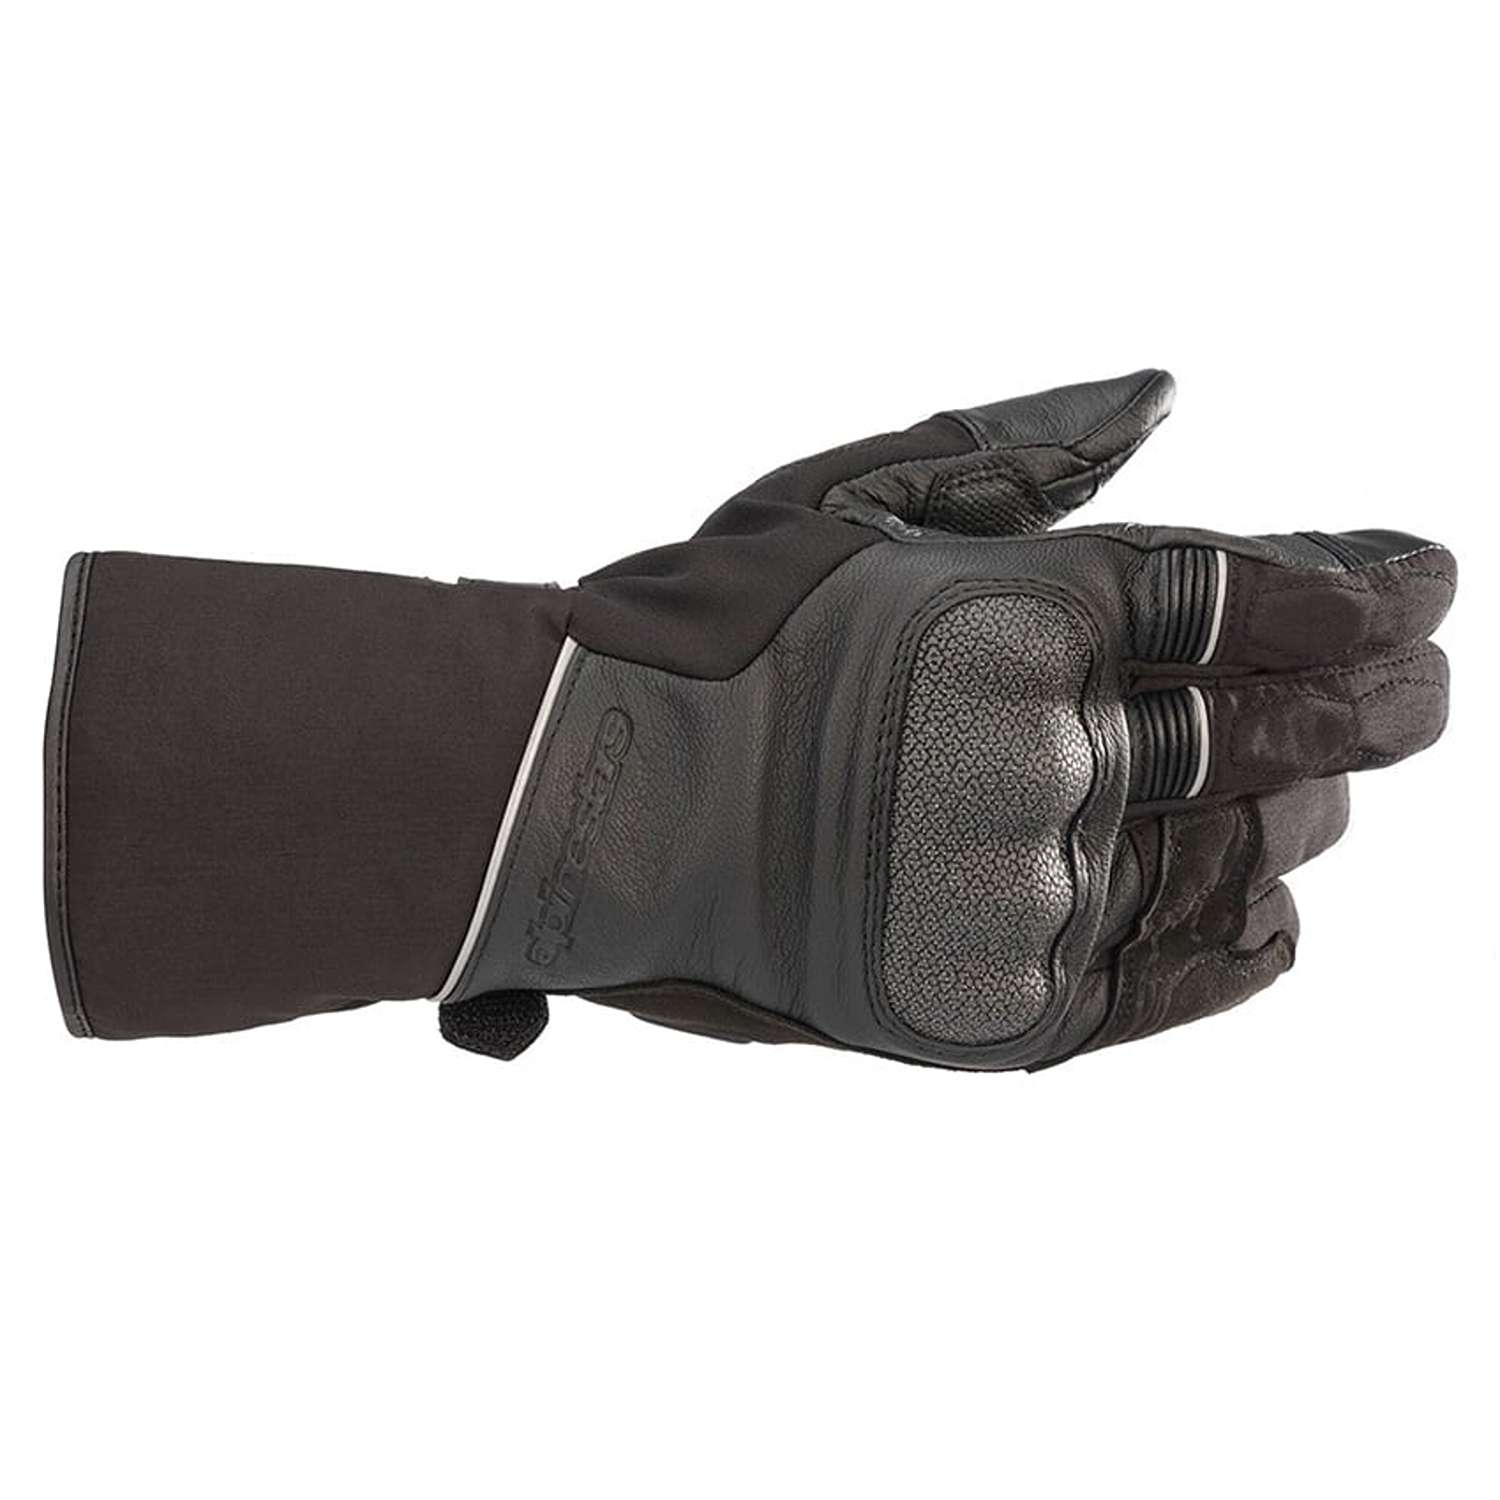 Image of Alpinestars Wr-2 V2 Gore-Tex Gloves With Gore Grip Technology Black Size L ID 8059175090158